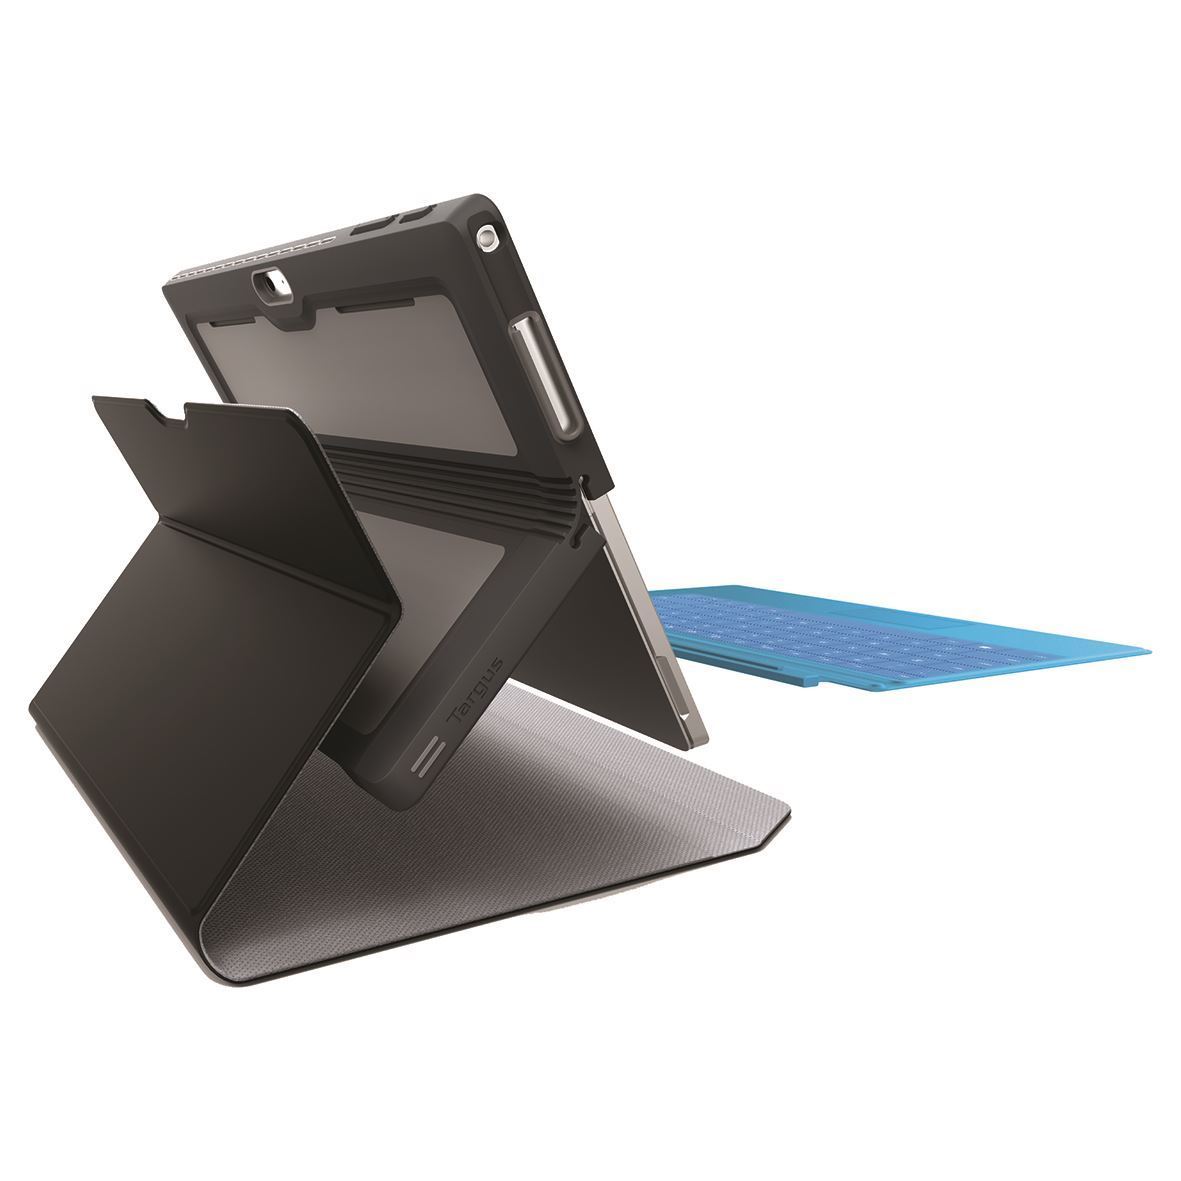 What are some popular cases for the Microsoft Surface Pro?